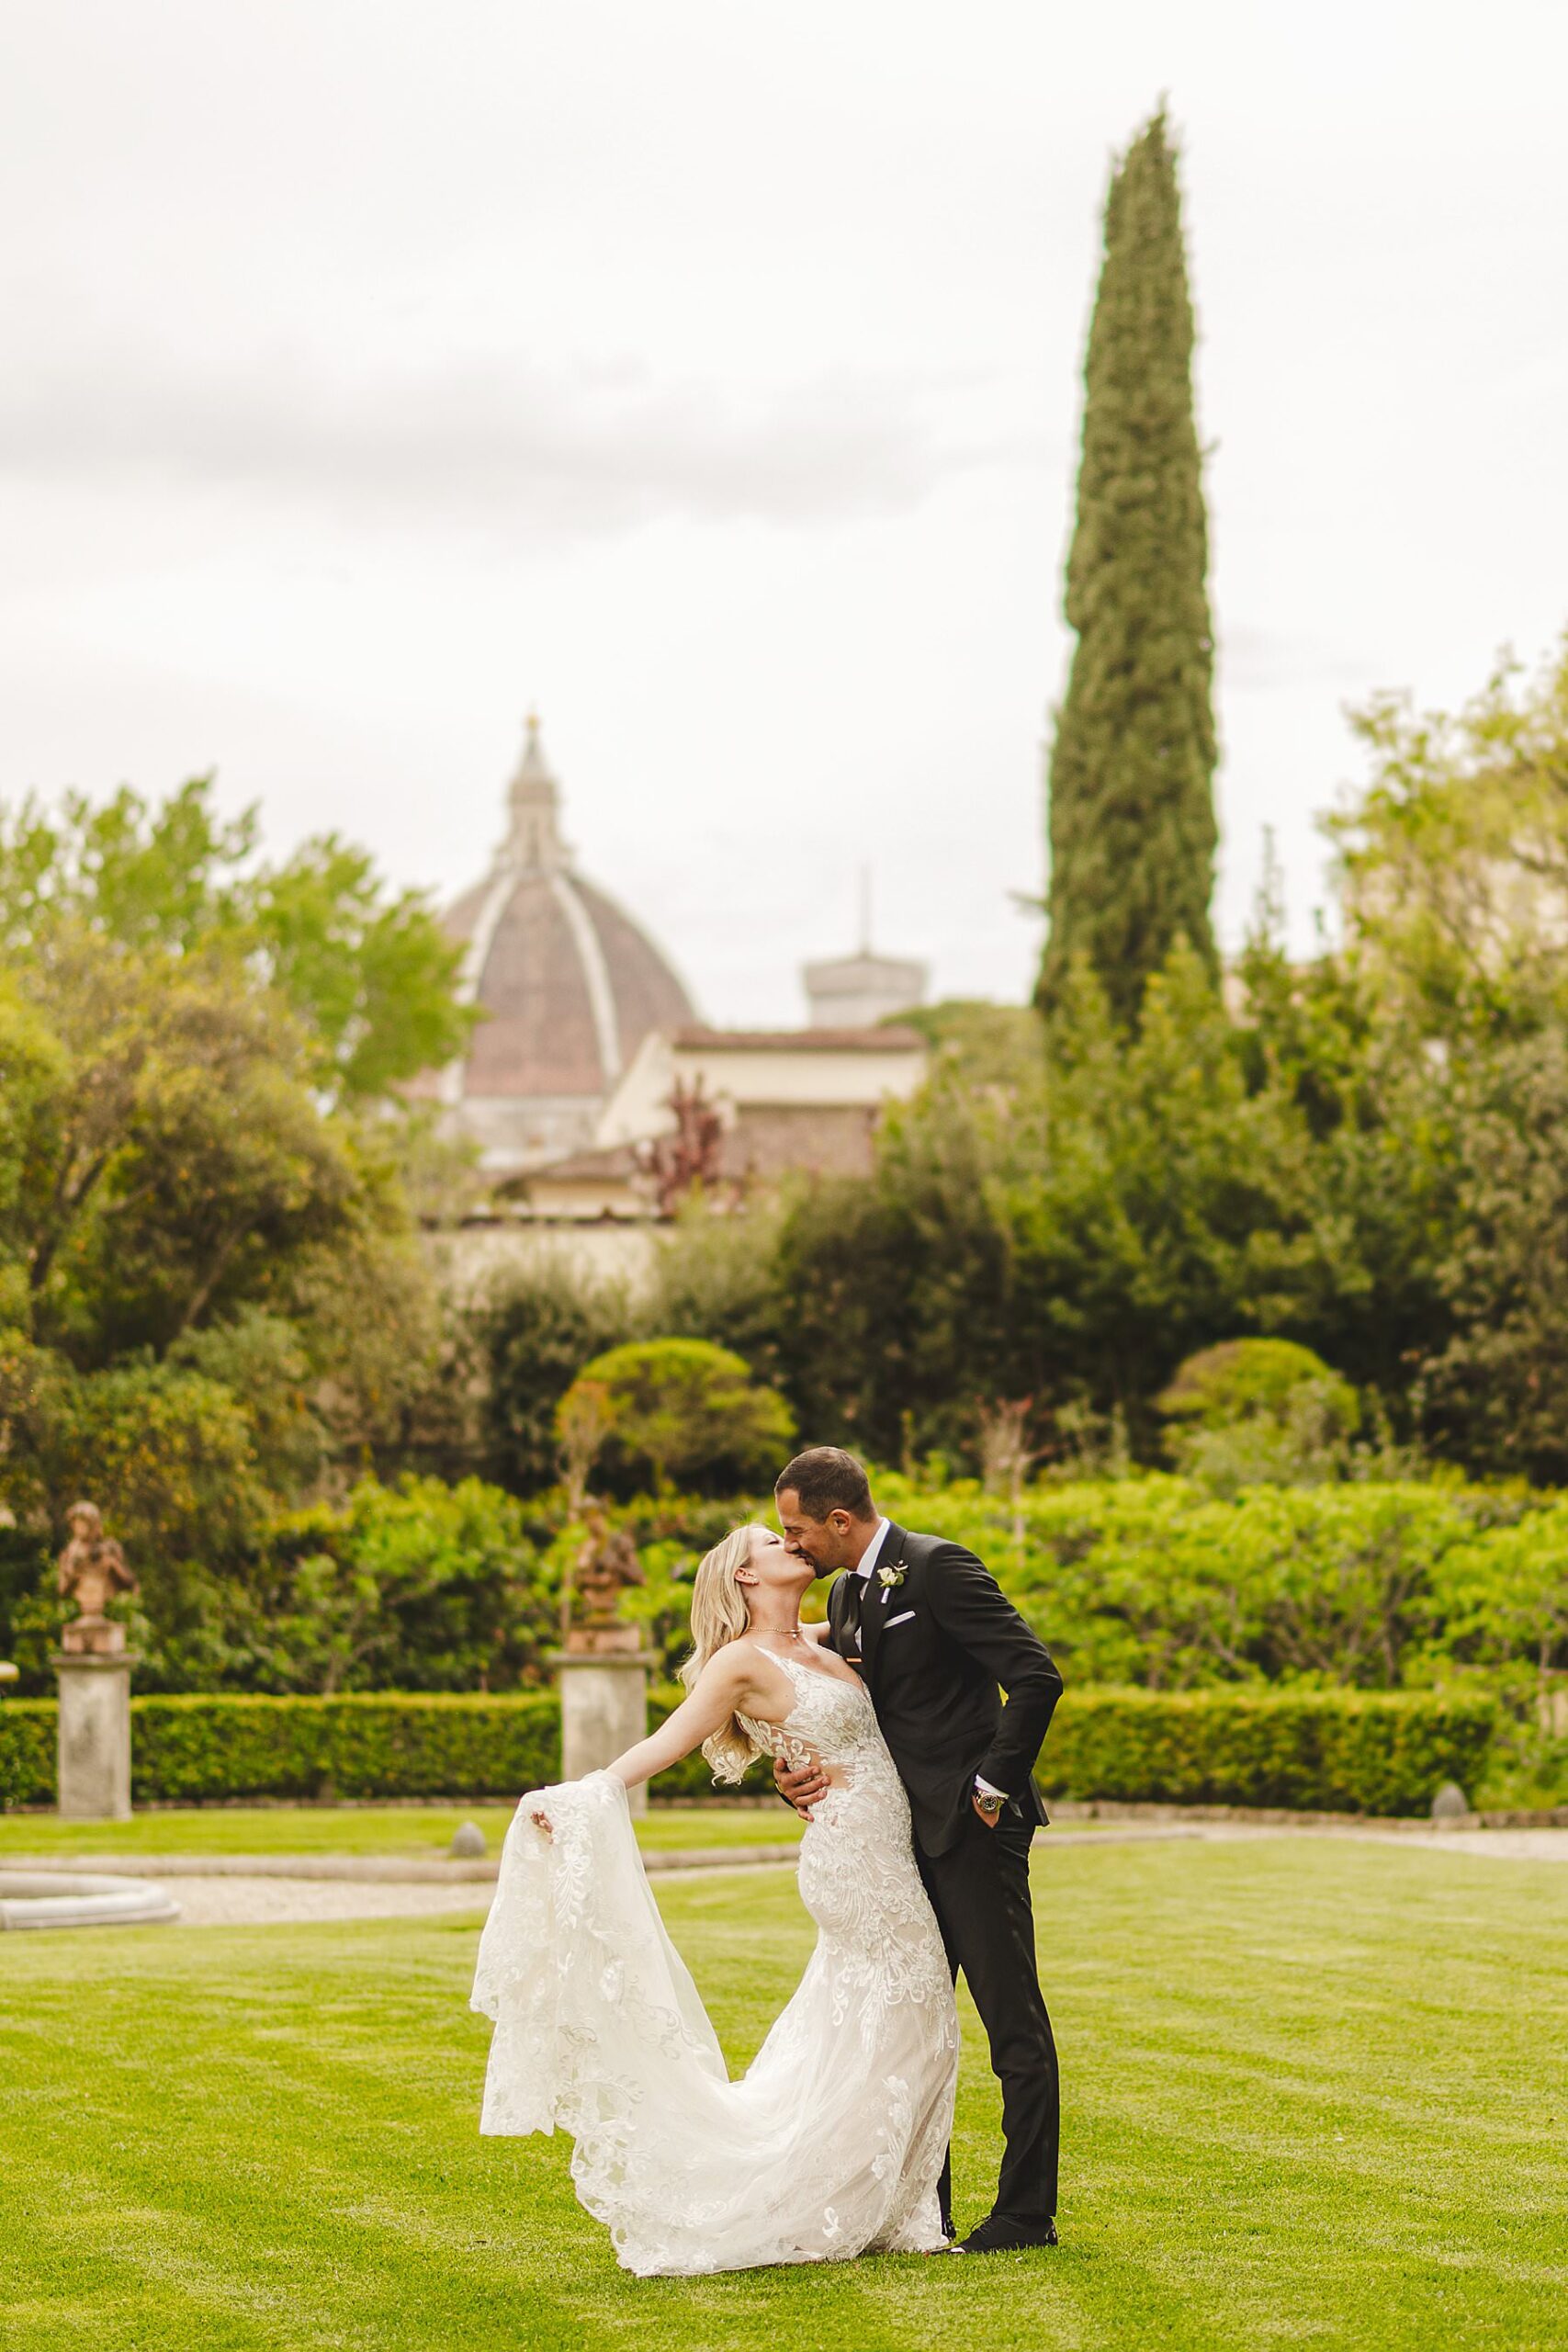 An unforgettable elopement wedding at the Four Seasons Florence